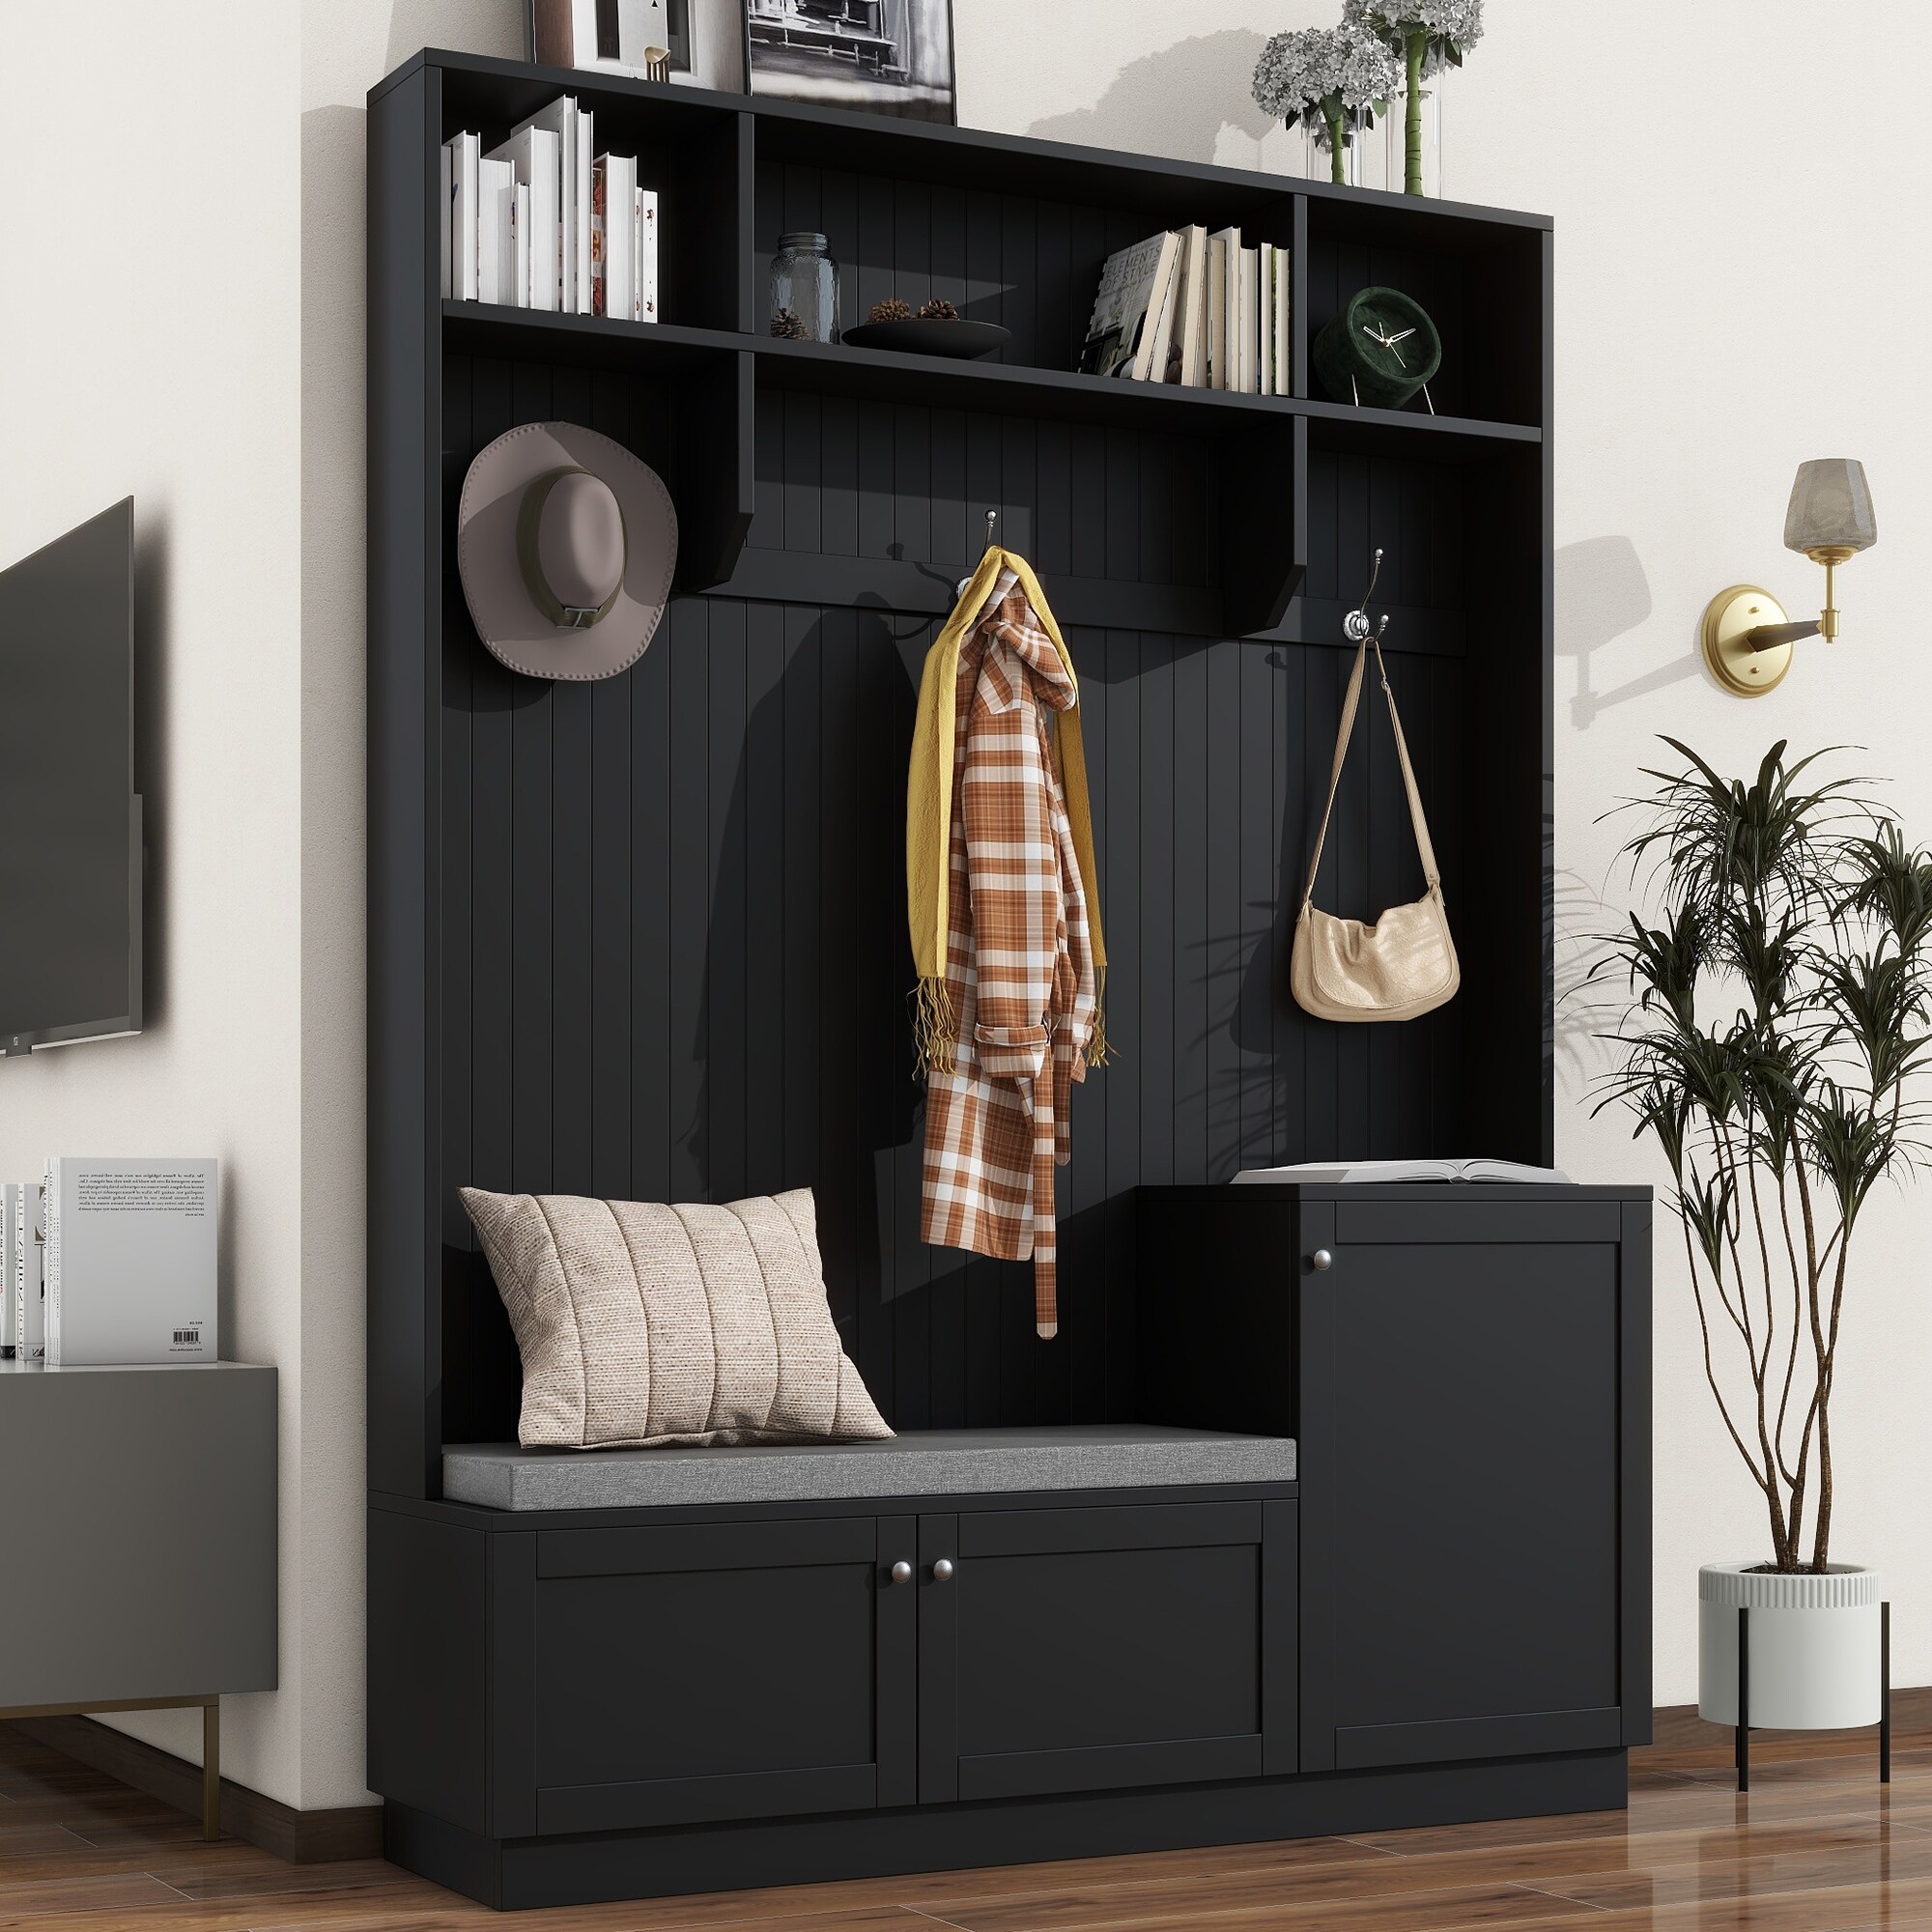 https://ak1.ostkcdn.com/images/products/is/images/direct/62ed7a8d849ce06d62700db9ece9cf4627750862/Modern-Hall-Tree%2C-Shoe-Cabinet-with-Bench-%26-Cushion%2C-Coat-Rack-with-Hooks.jpg